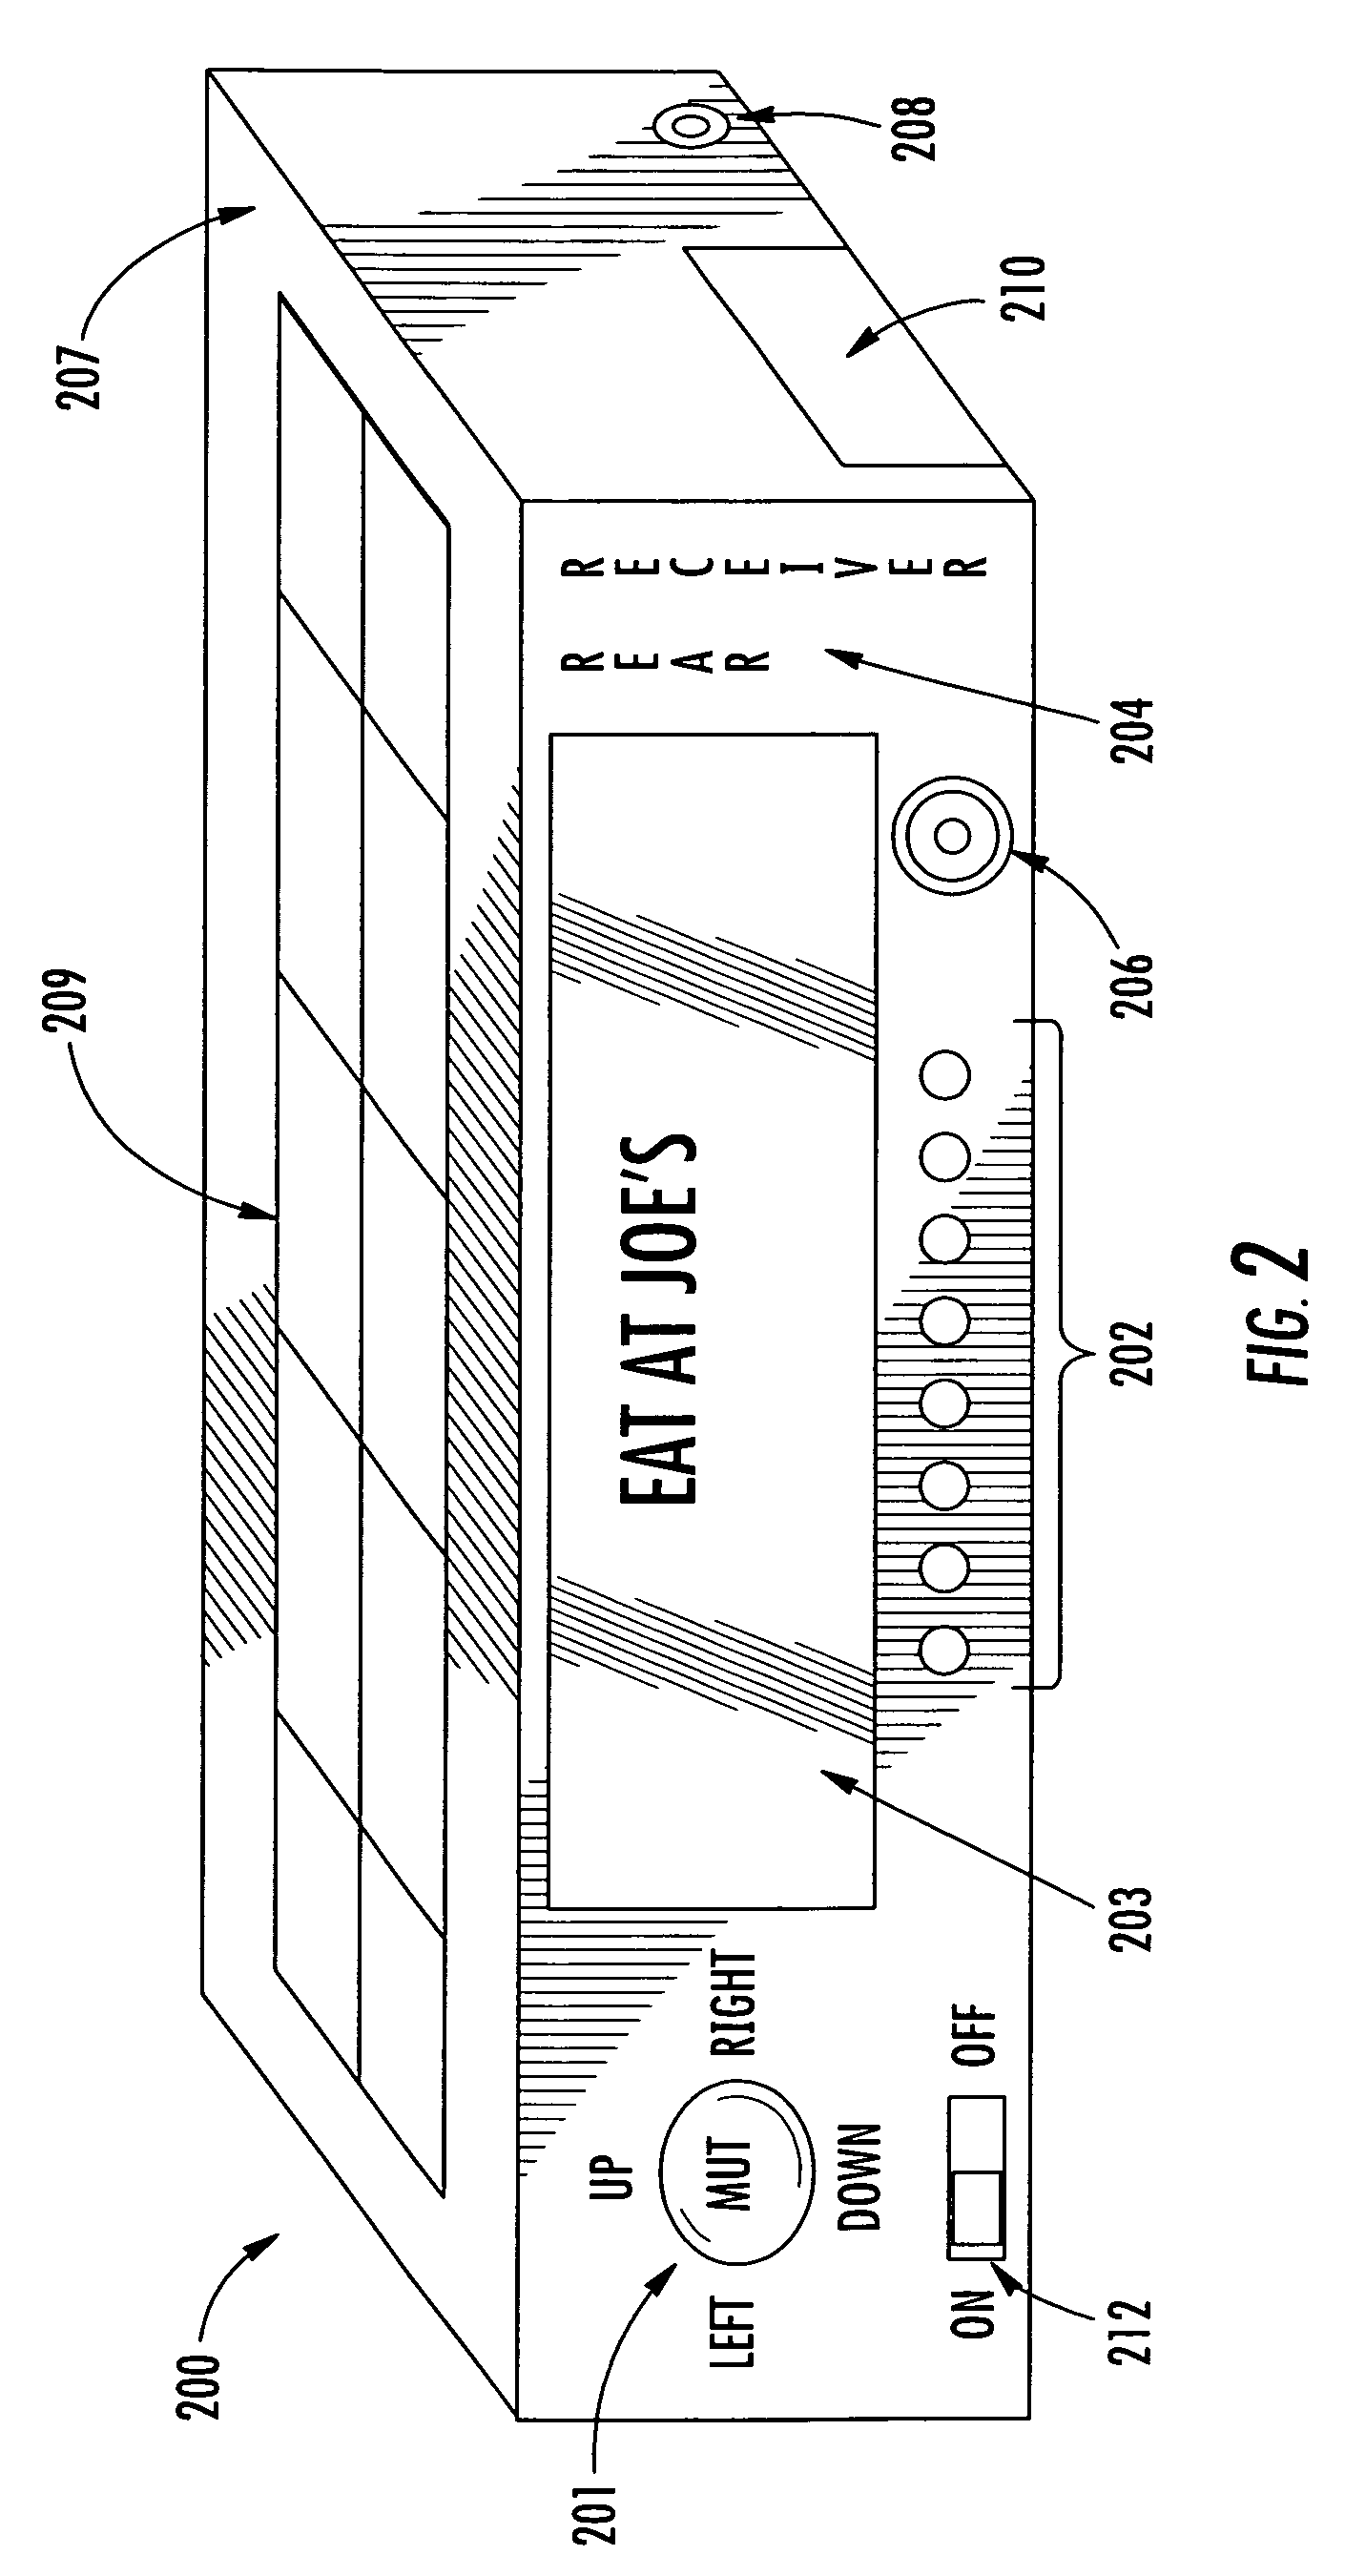 Advertising system and method of use